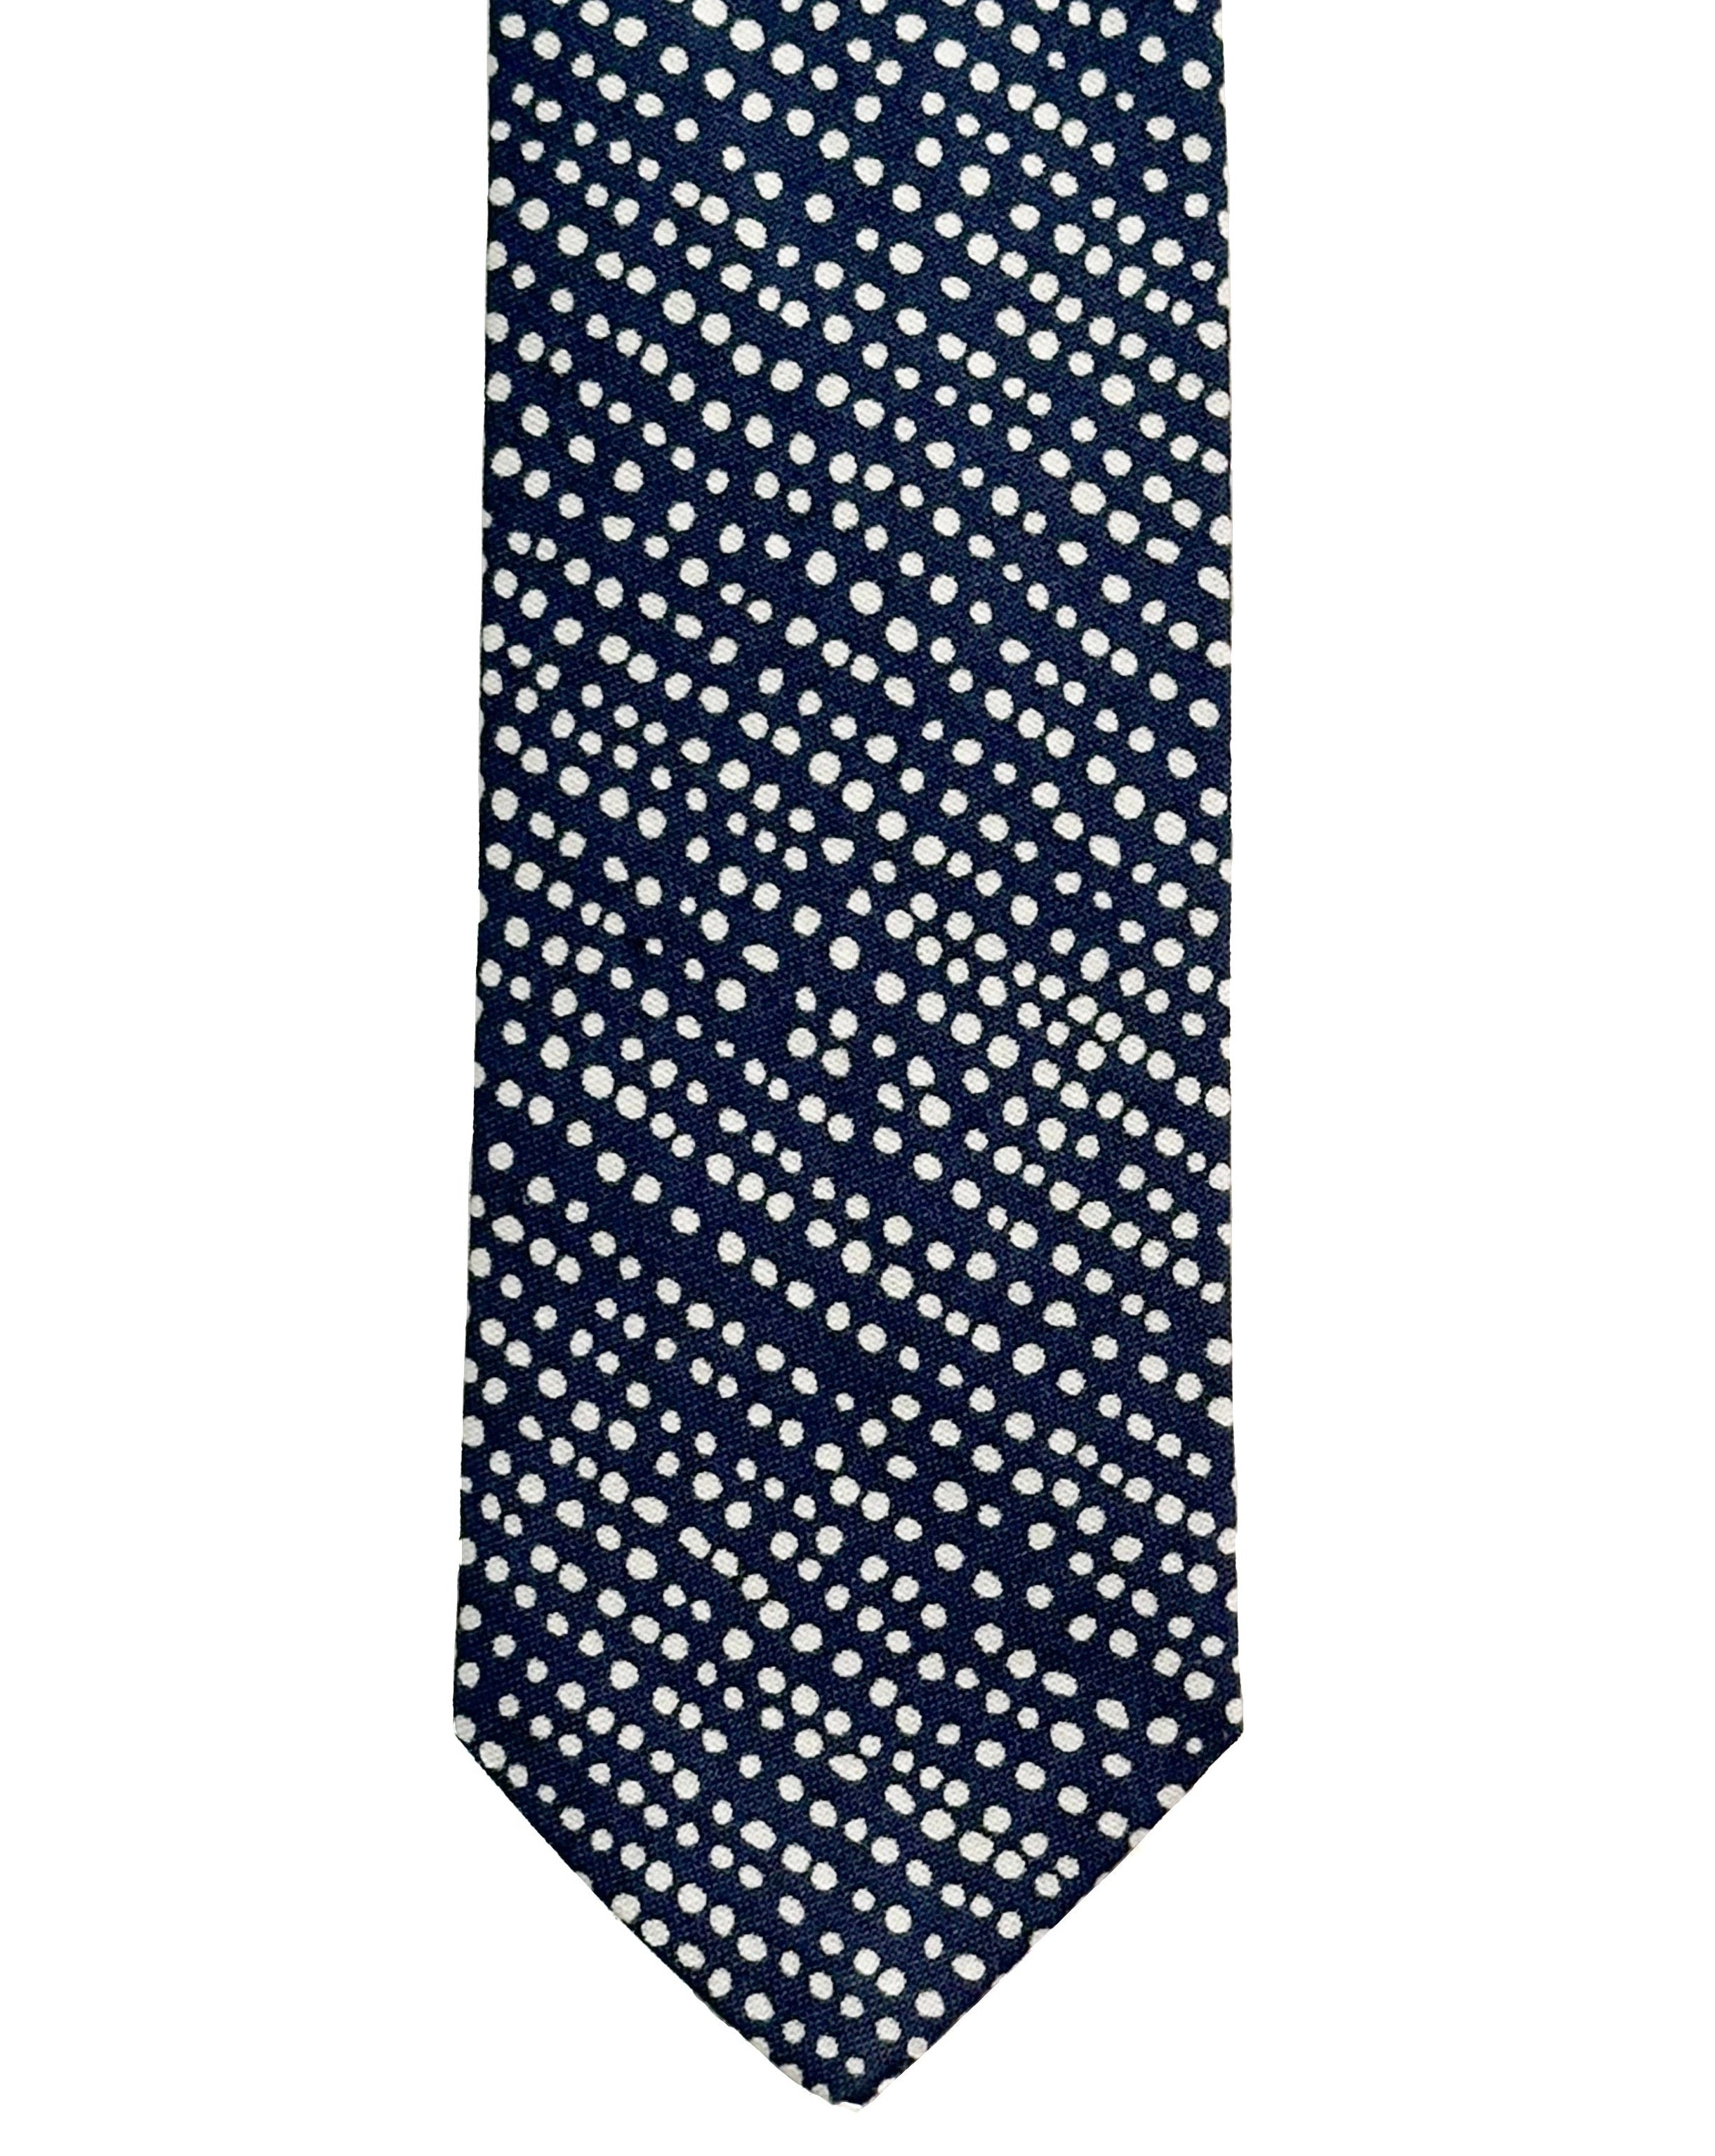 The Tie | Space Dots